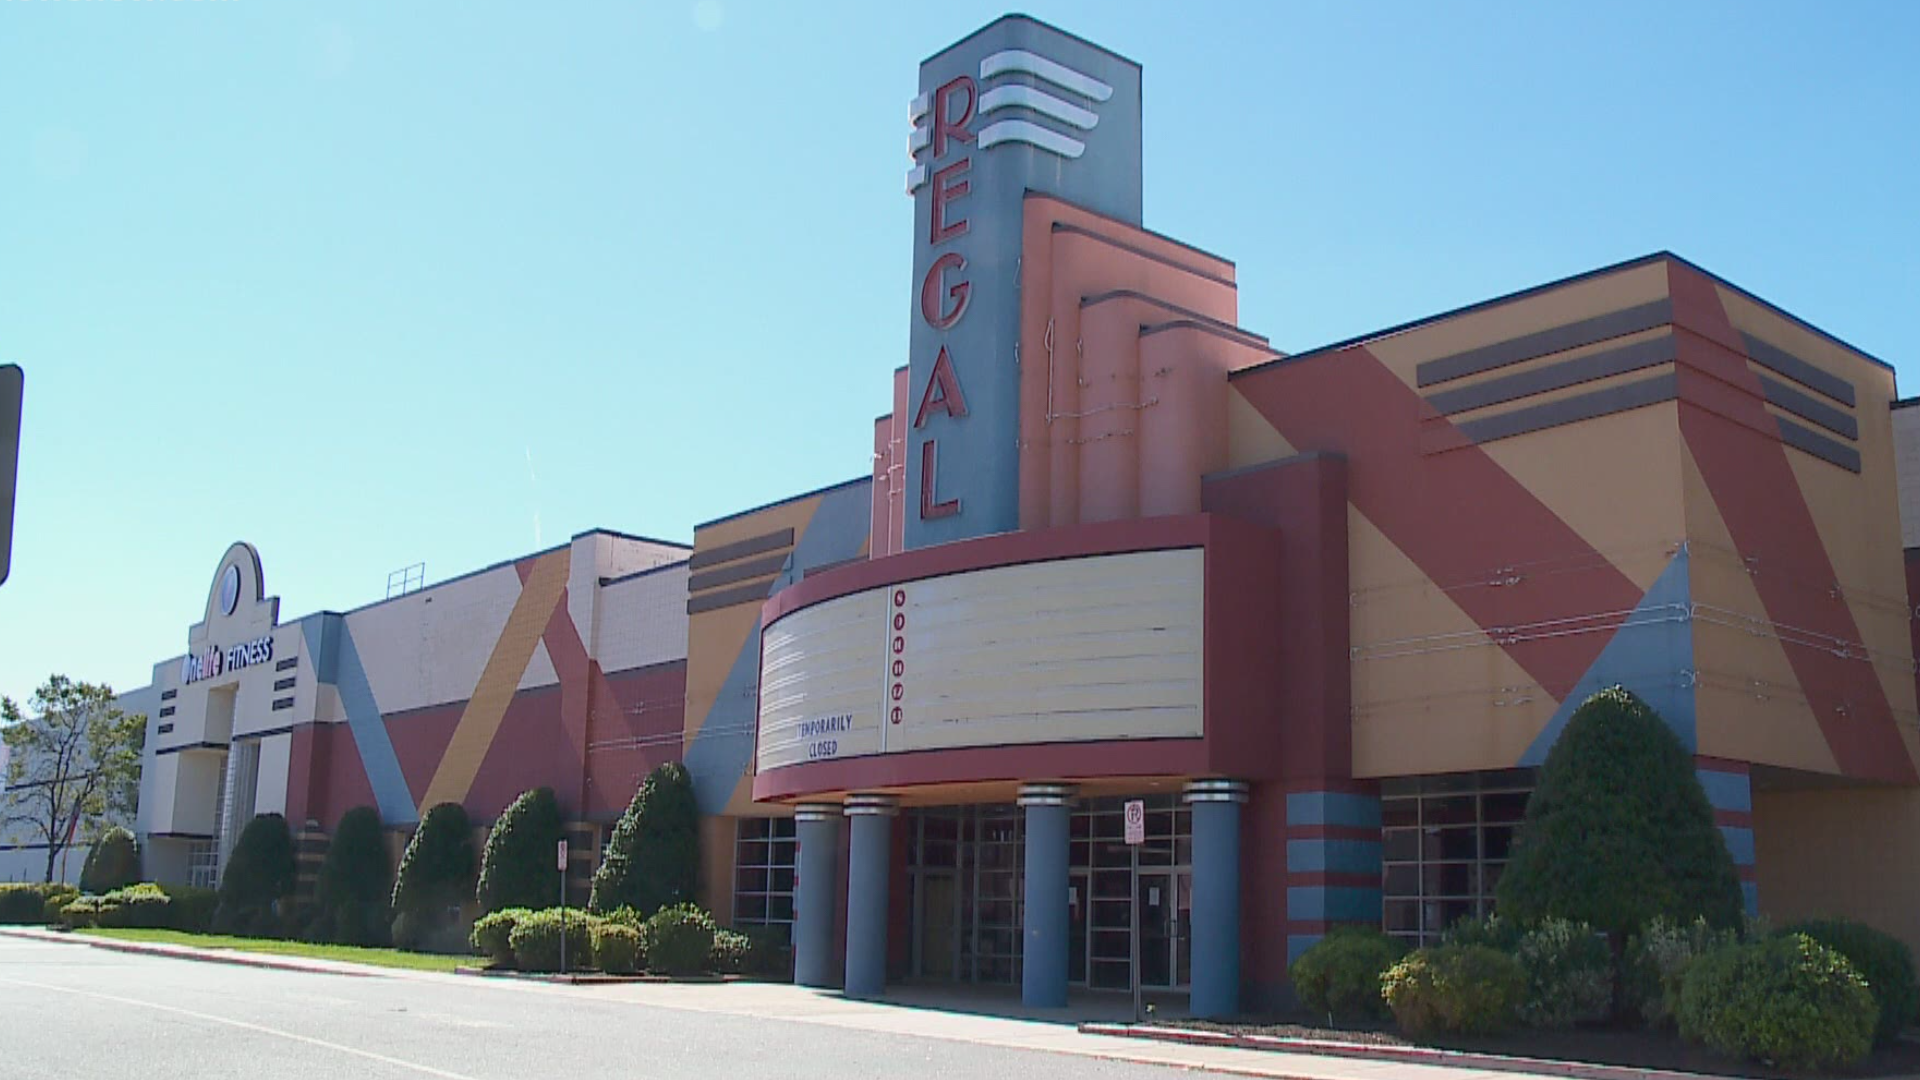 All Regal Cinemas in the U.S. will temporarily suspend operations again "until further notice," as some big blockbuster films see long release delays.